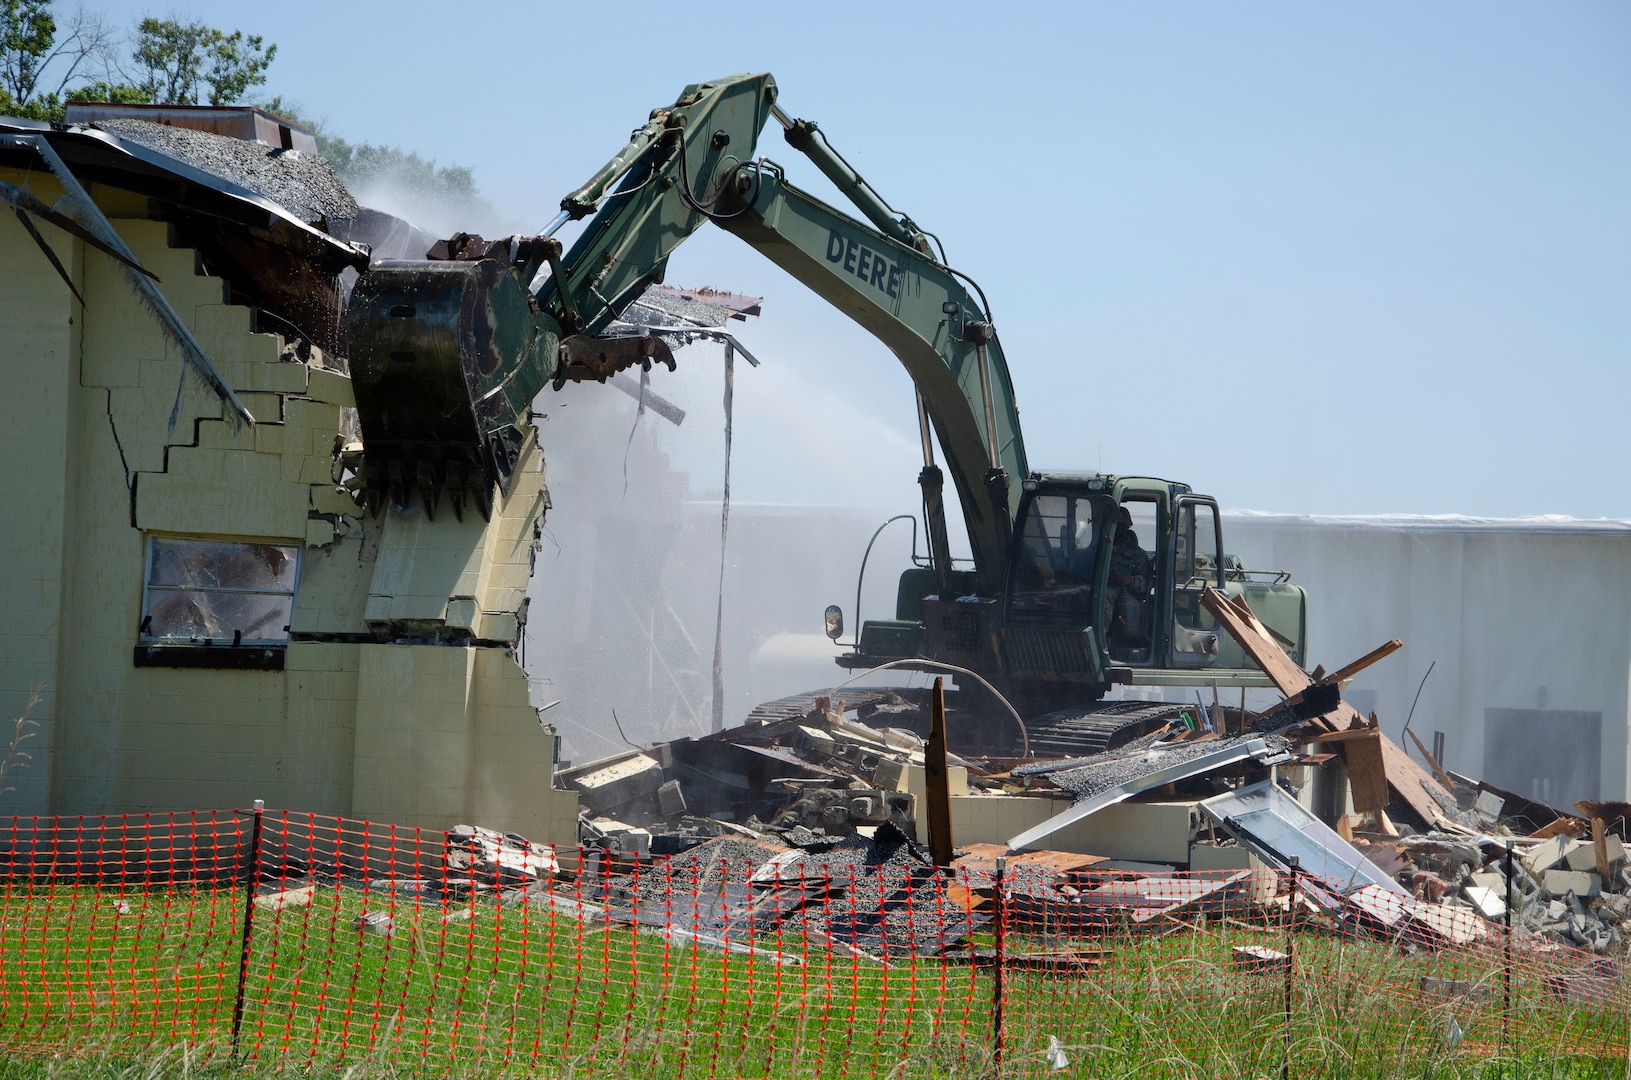 A Georgia Army National Guard Soldier with the 877th Engineer Company, 878th Engineer Battalion, operates an excavator to demolish a building scheduled for demolition at  Fort Benning.